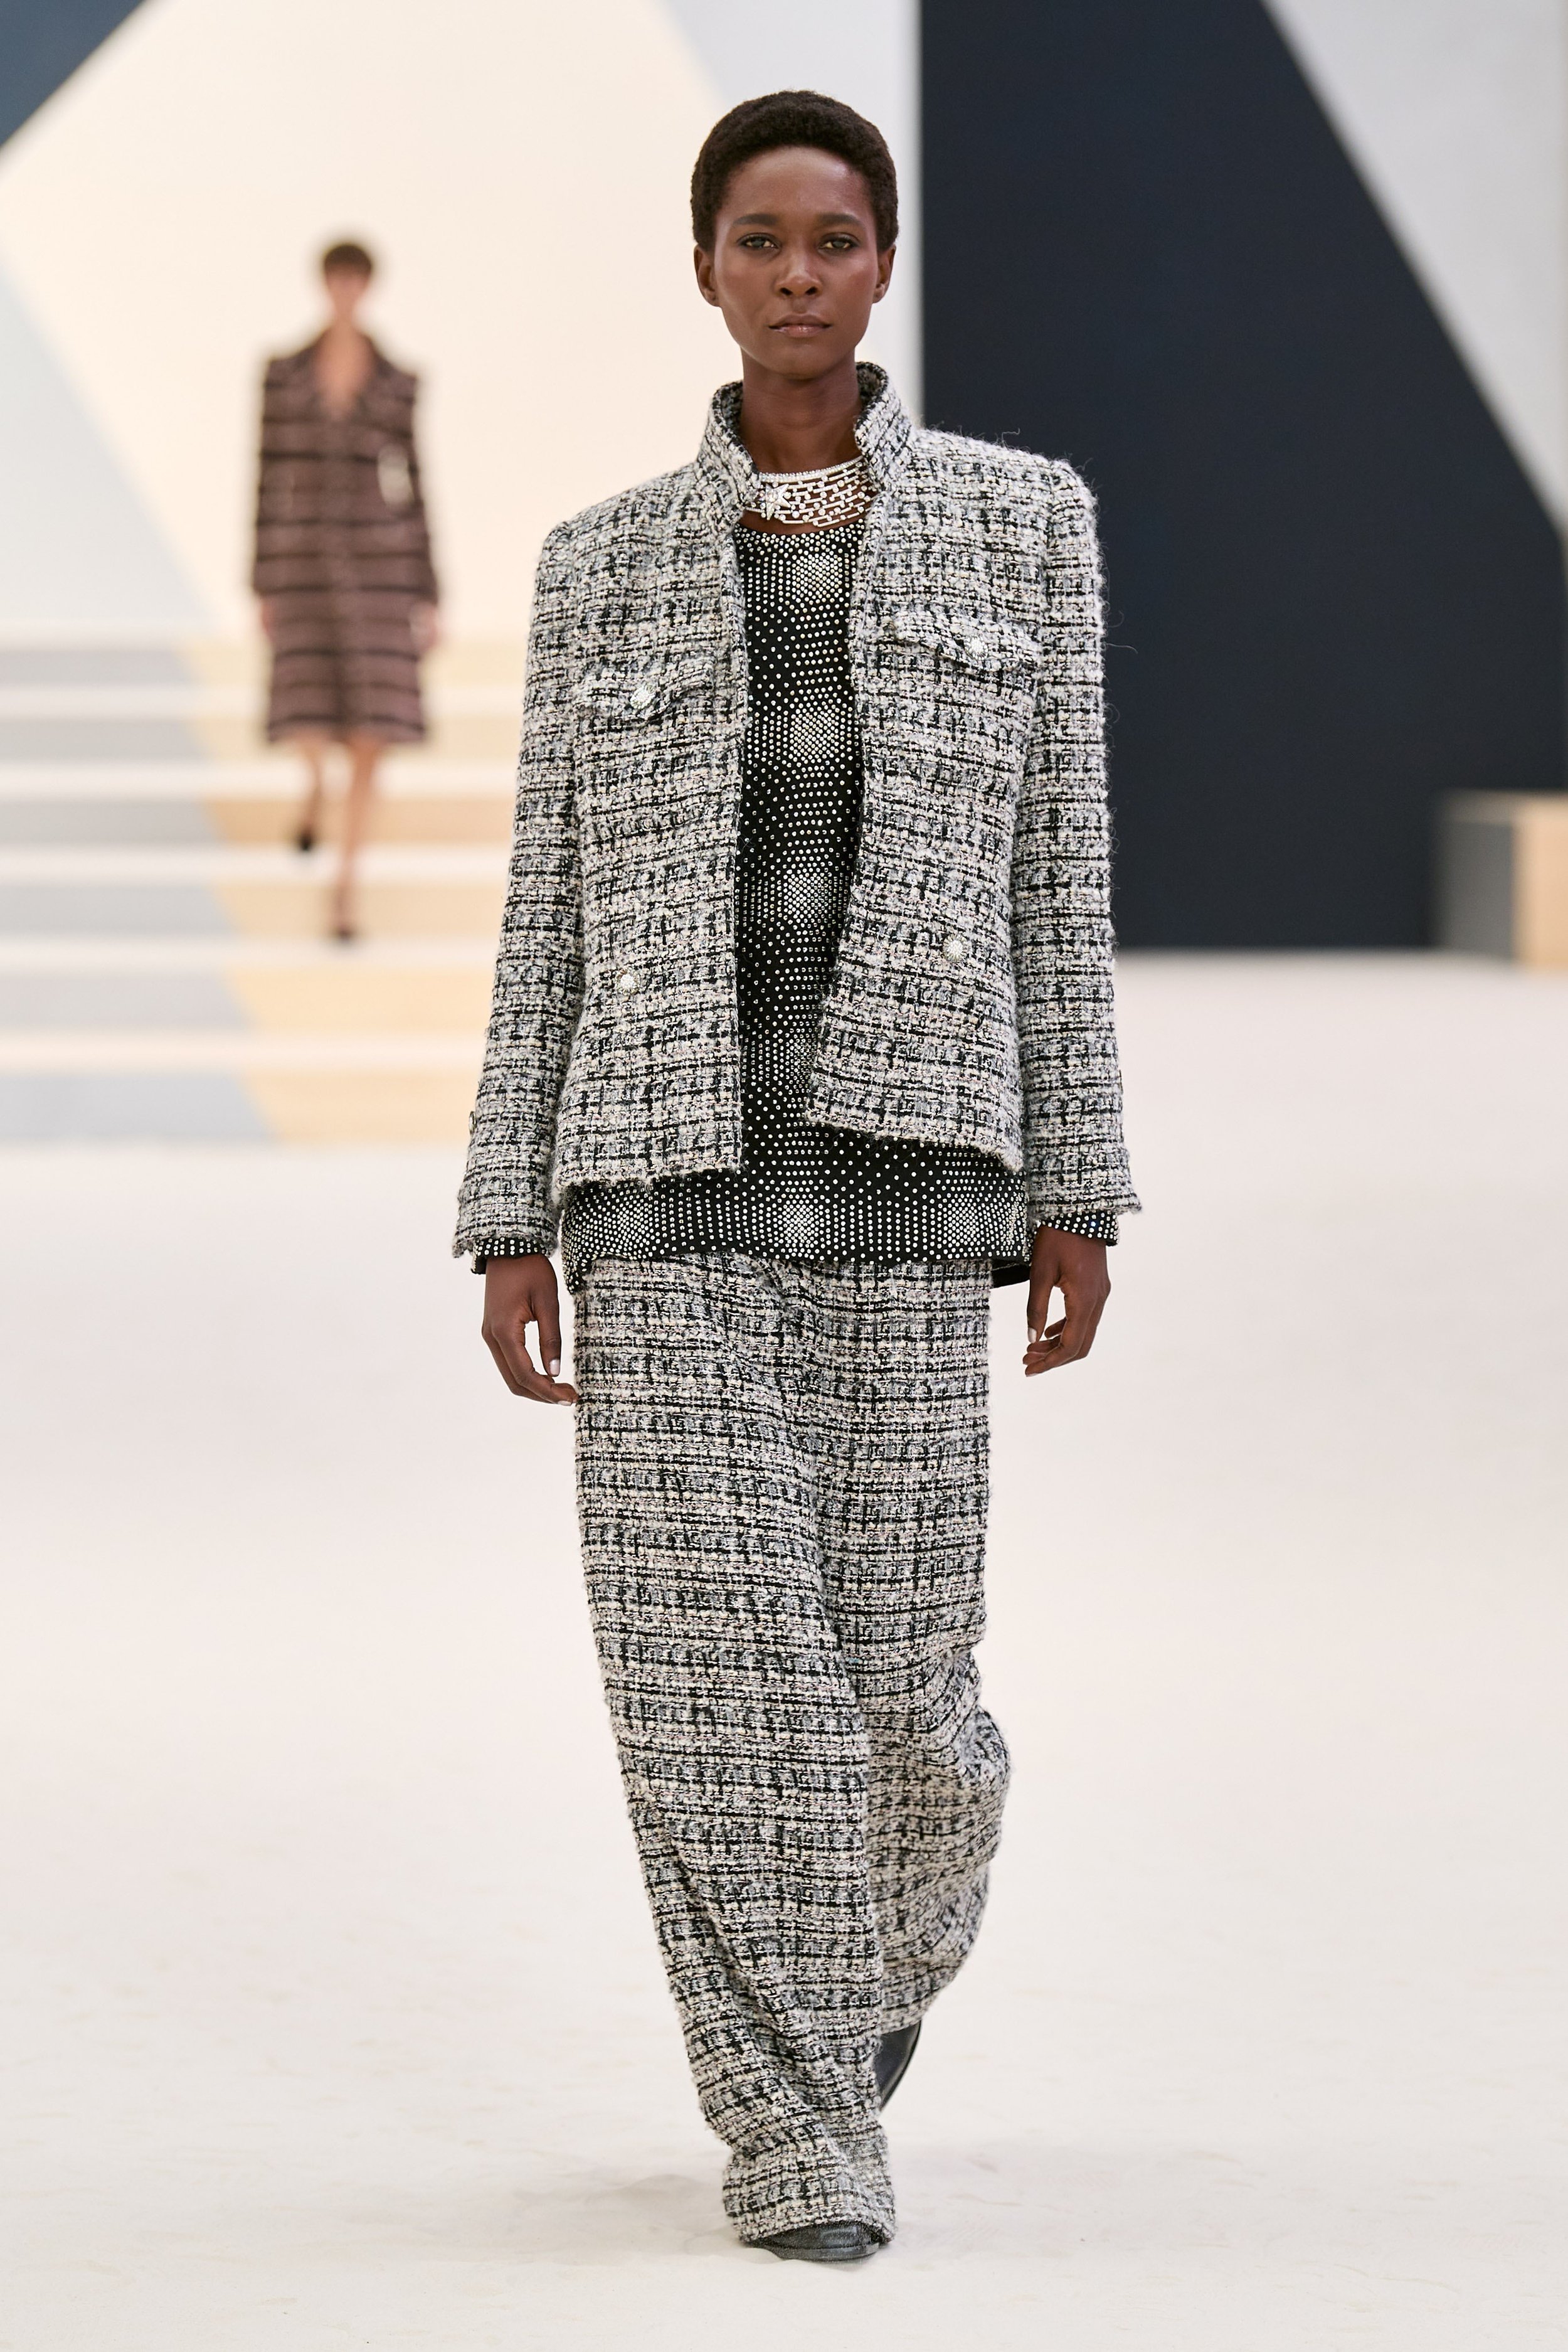 Chanel's timeless couture curiosity of the past, present and